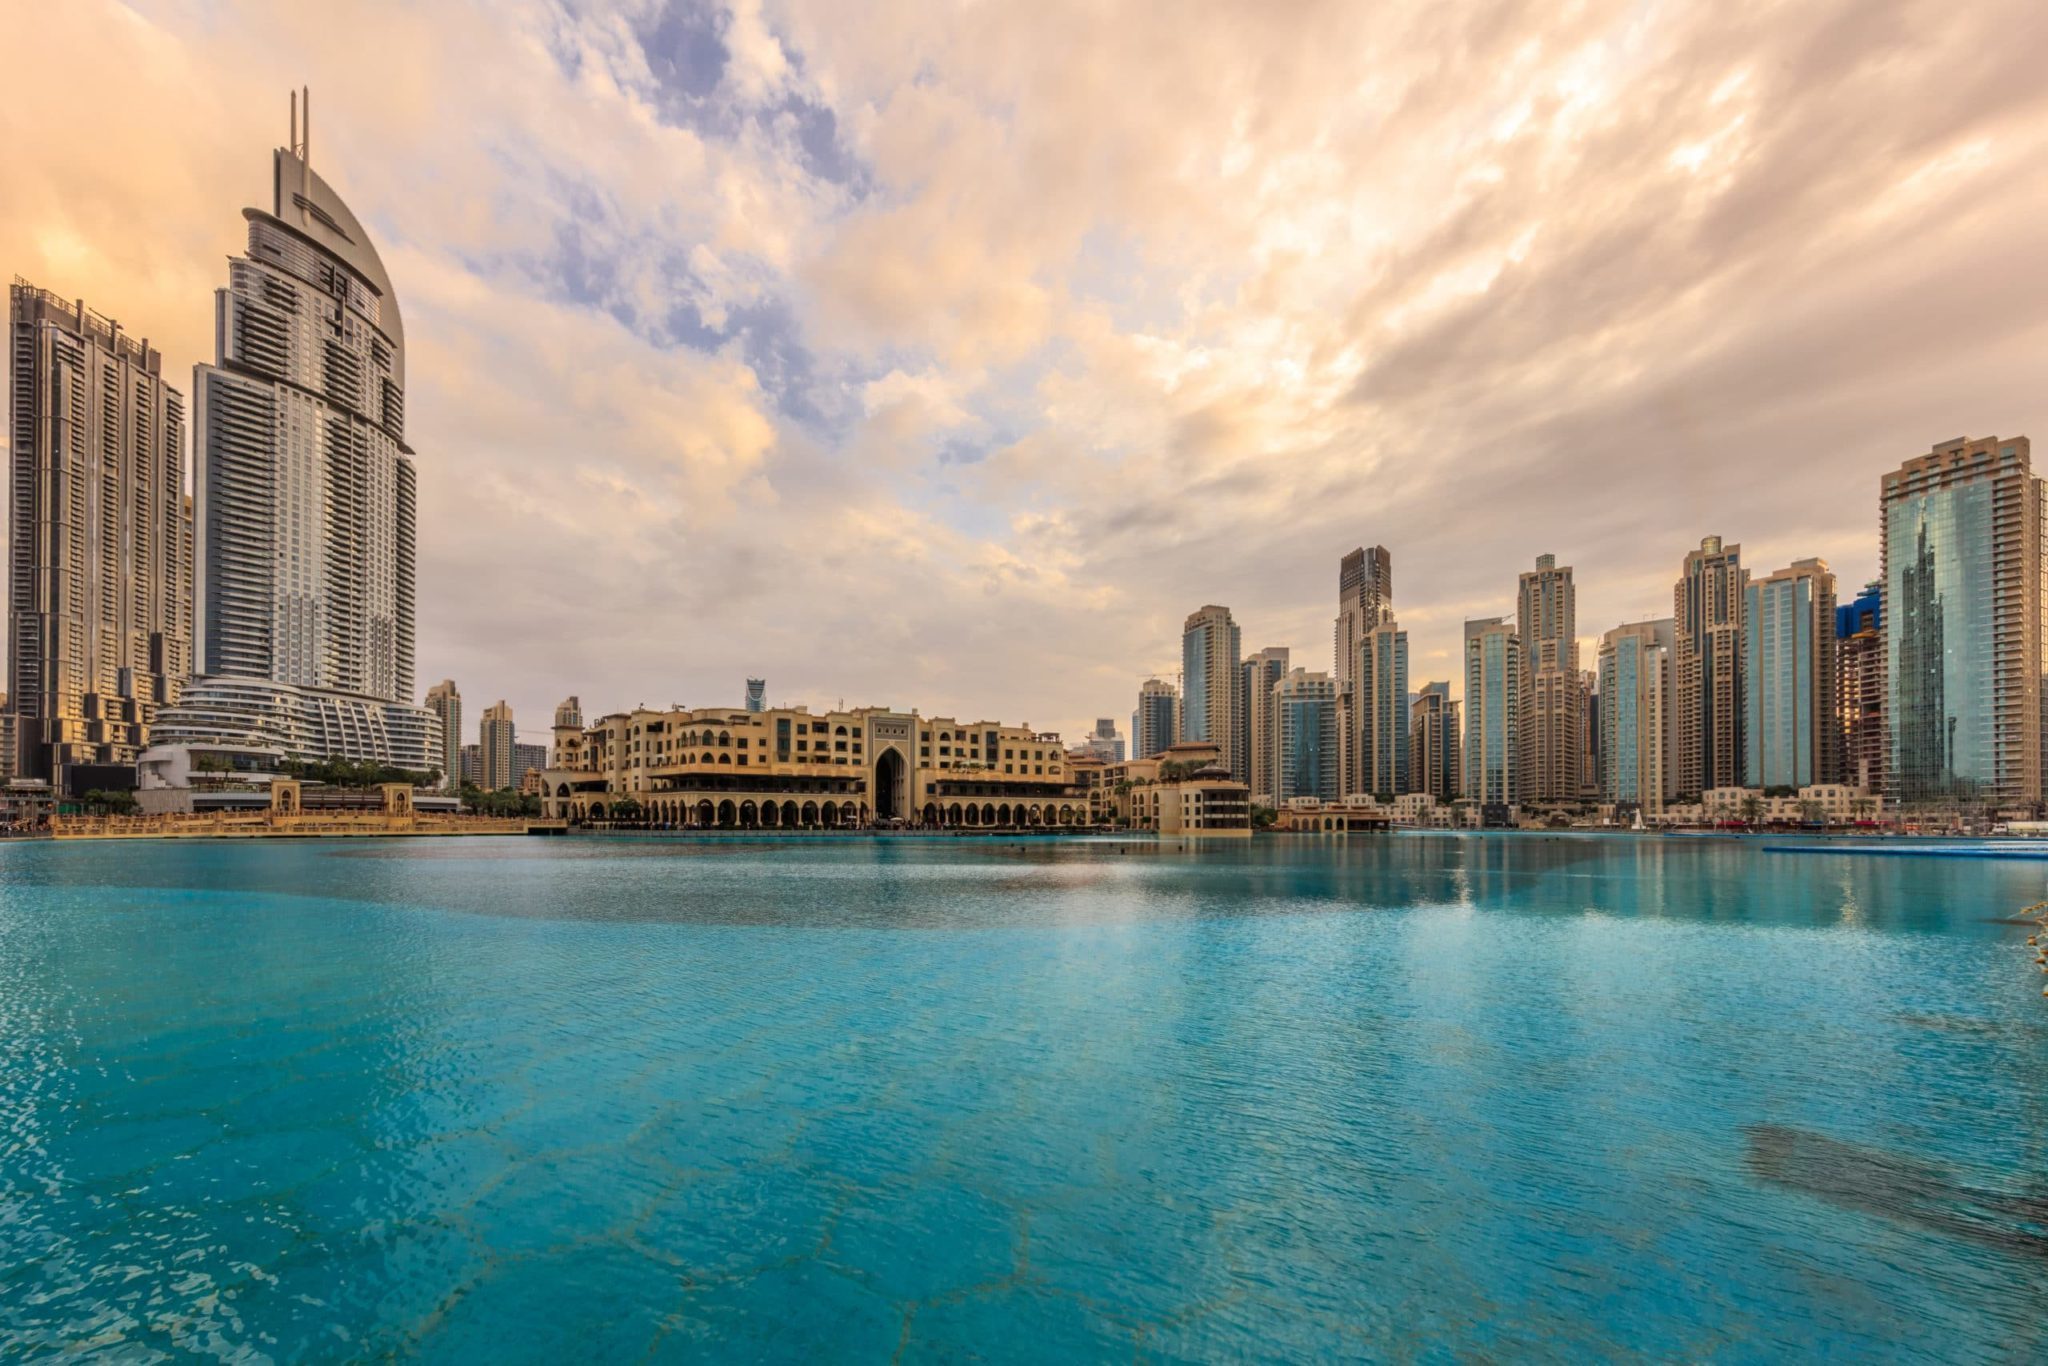 Landscape view in UAE with water and buildings